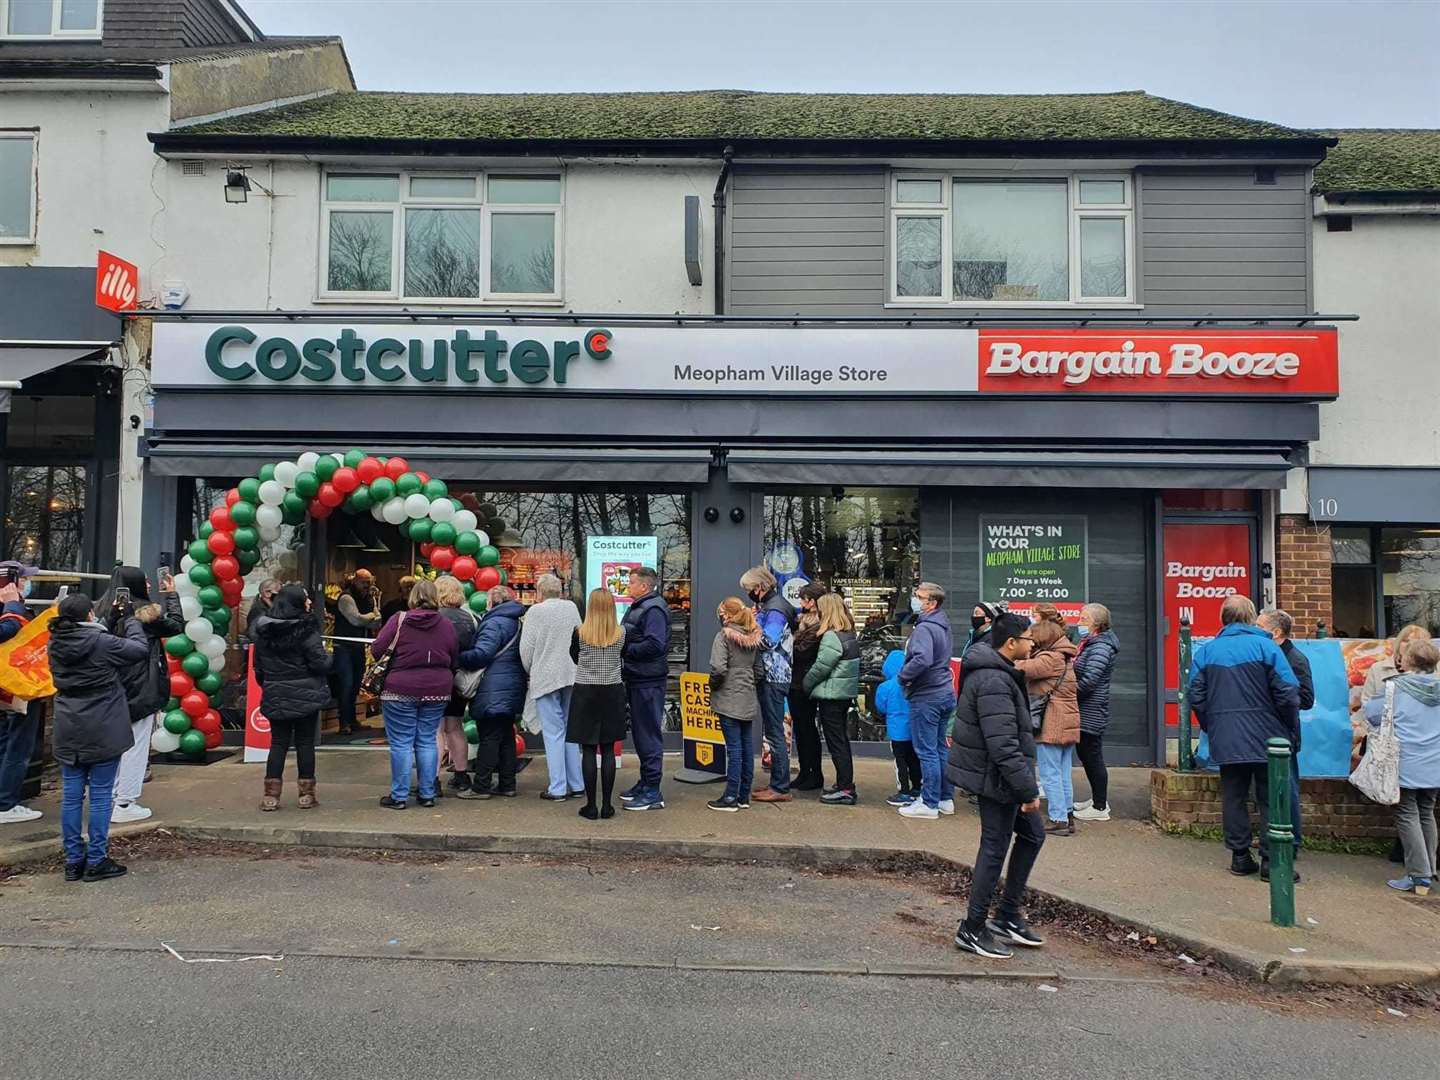 People were queuing outside to get a first glimpse of the new store